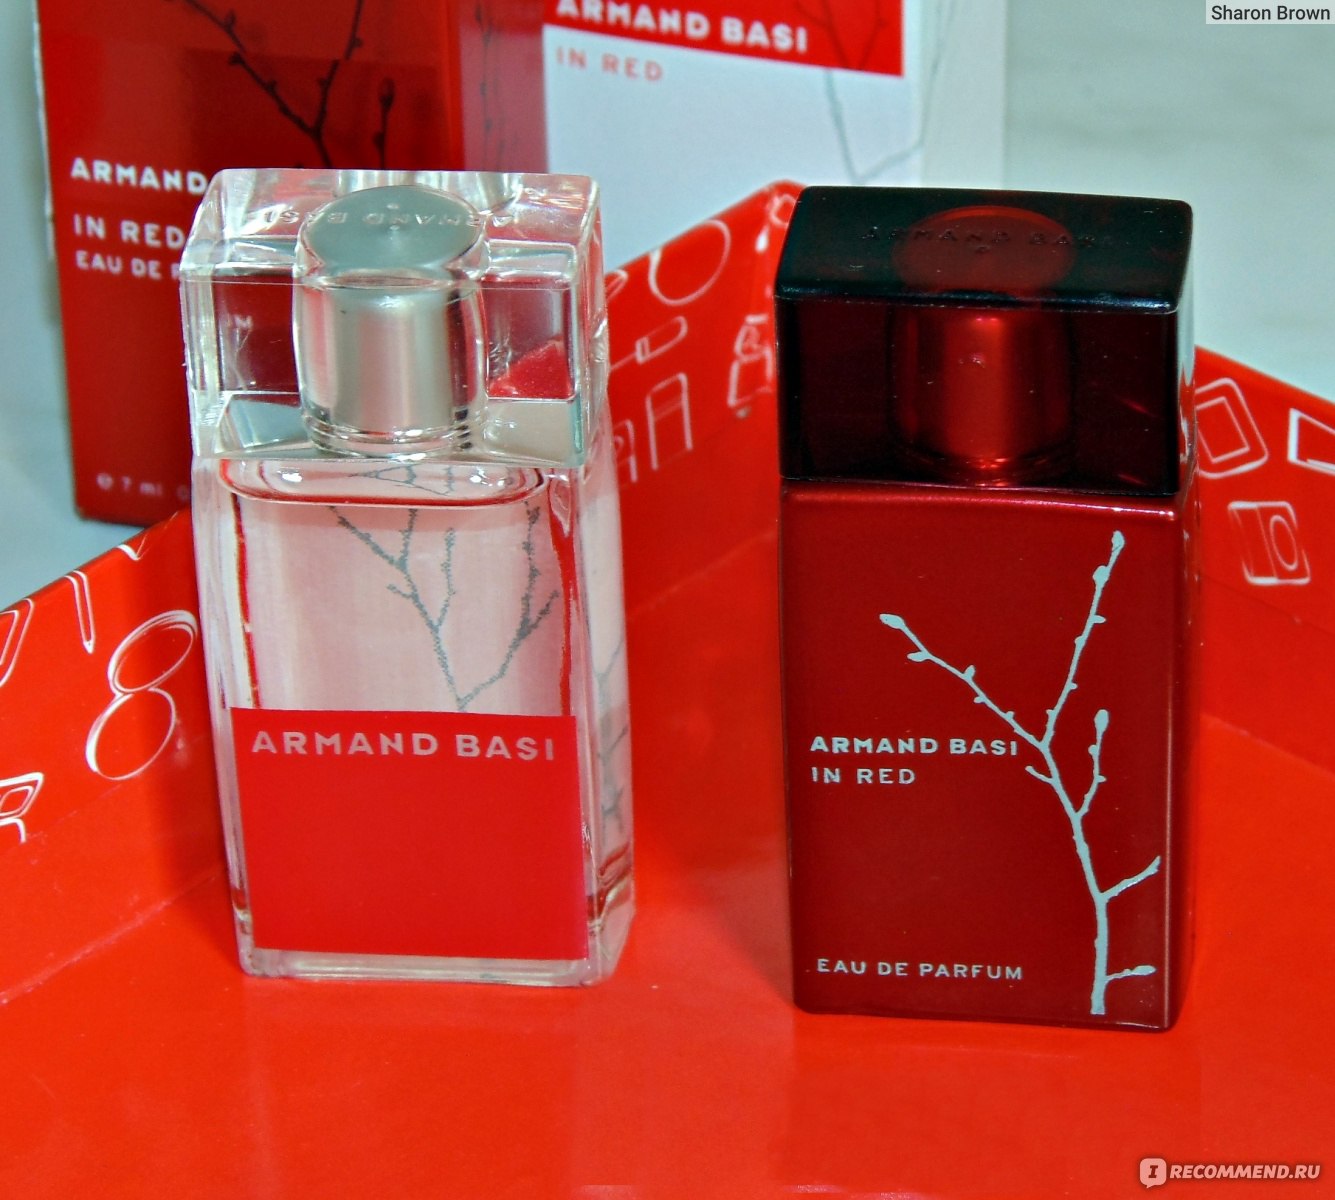 Basi in red отзывы. Armand basi in Red Eau de Parfum. Armand basi in Red EDP. Armand basi in Red миниатюра. Armand basi in Red EDP реклама.